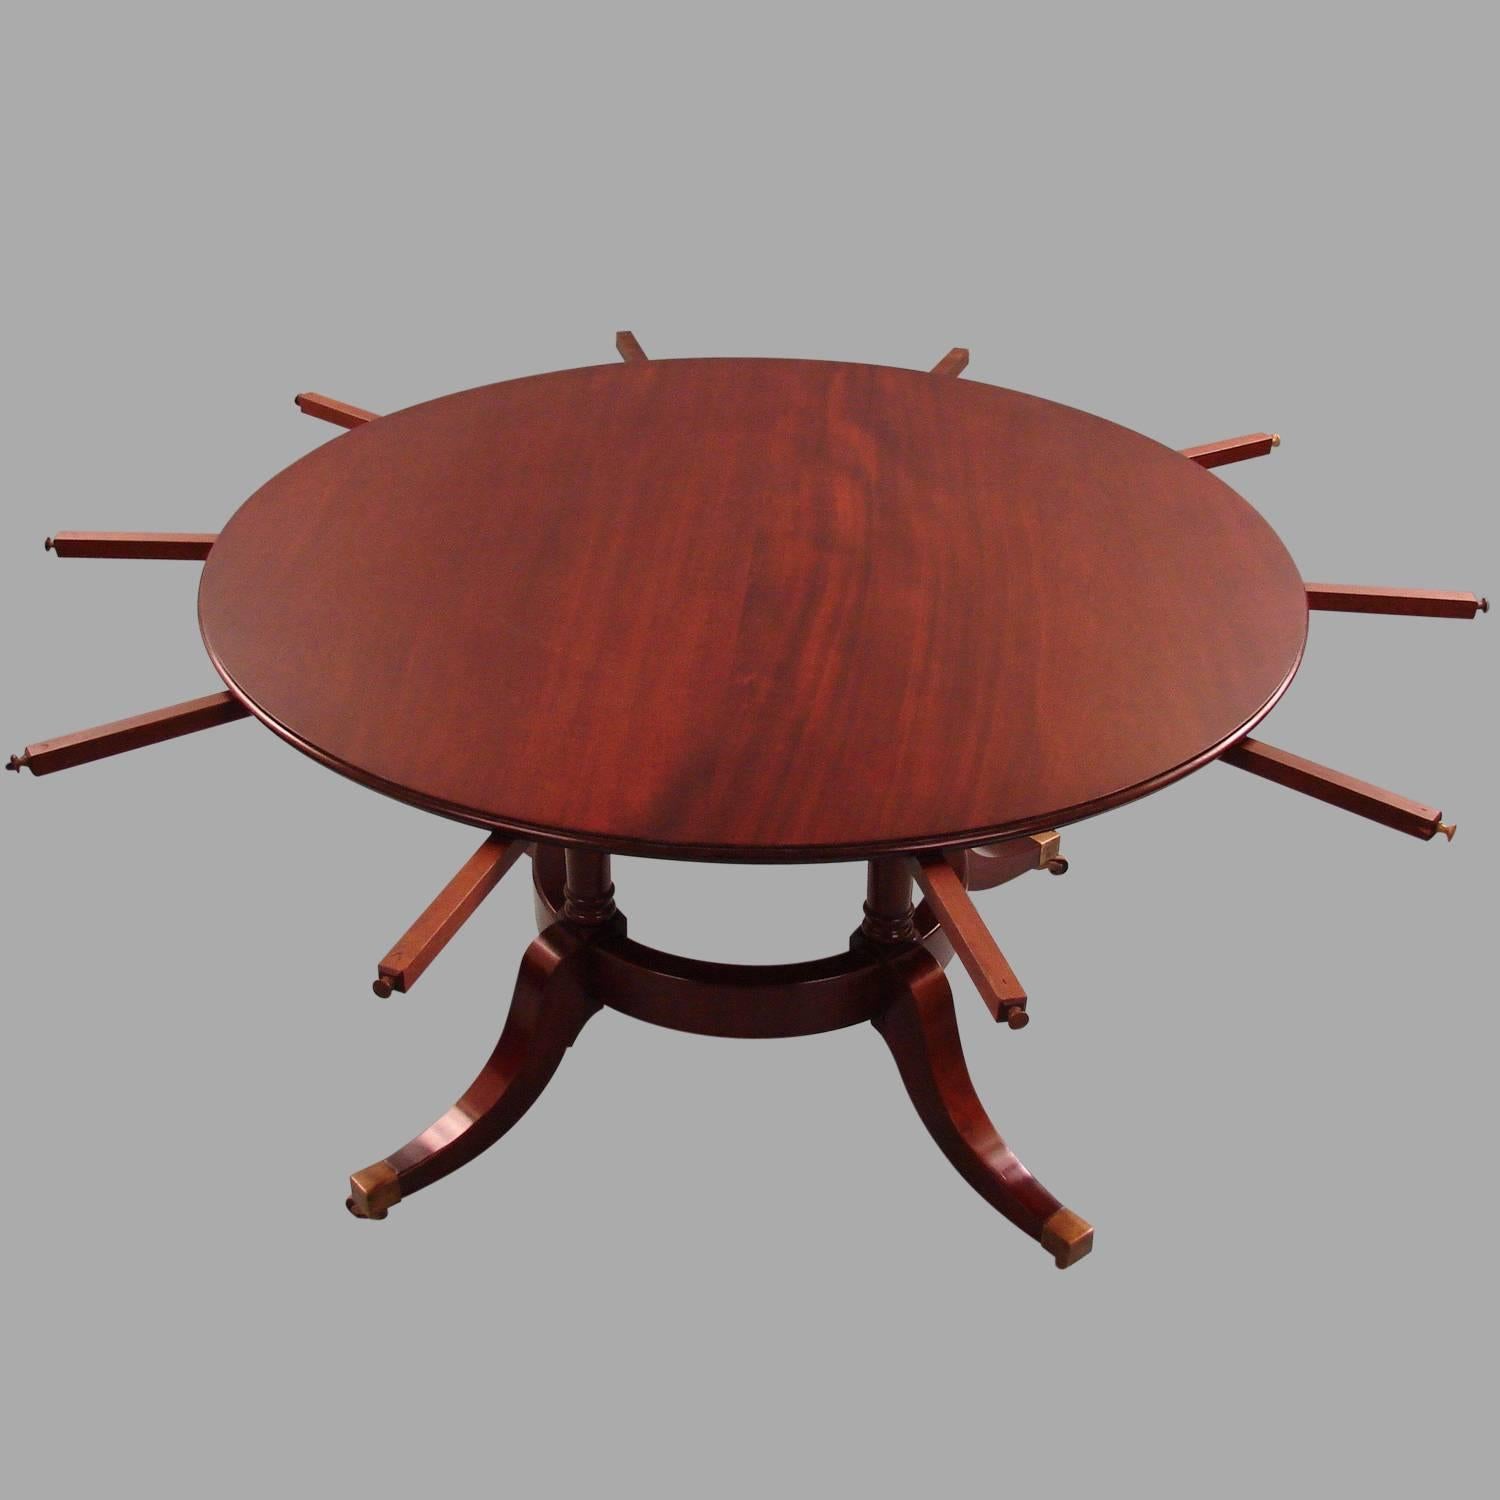 A Regency style circular mahogany dining table with five outer extension leaves, supported on a quadripartite base joined by a circular element, the down swept legs resting on brass caps and casters, 20th century.